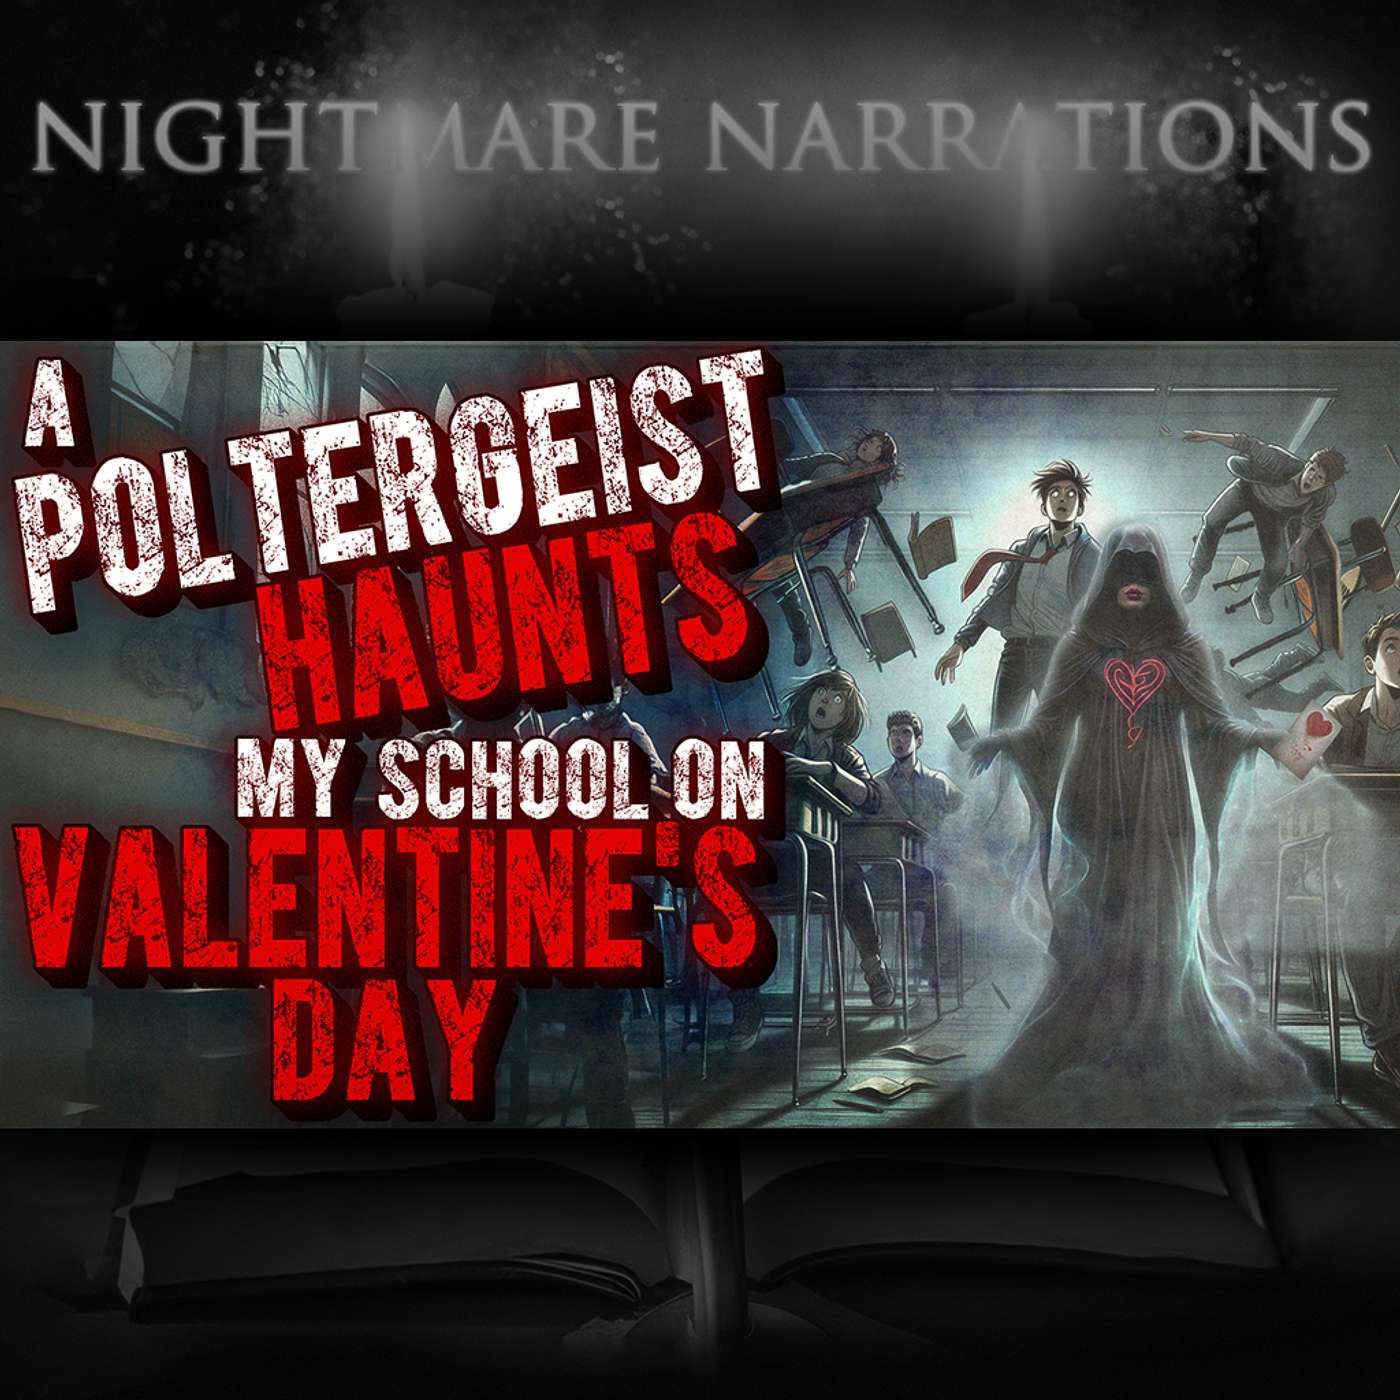 Beware: A Poltergeist Haunts my School on Valentine's Day - Scary Story - Nightmare Narration